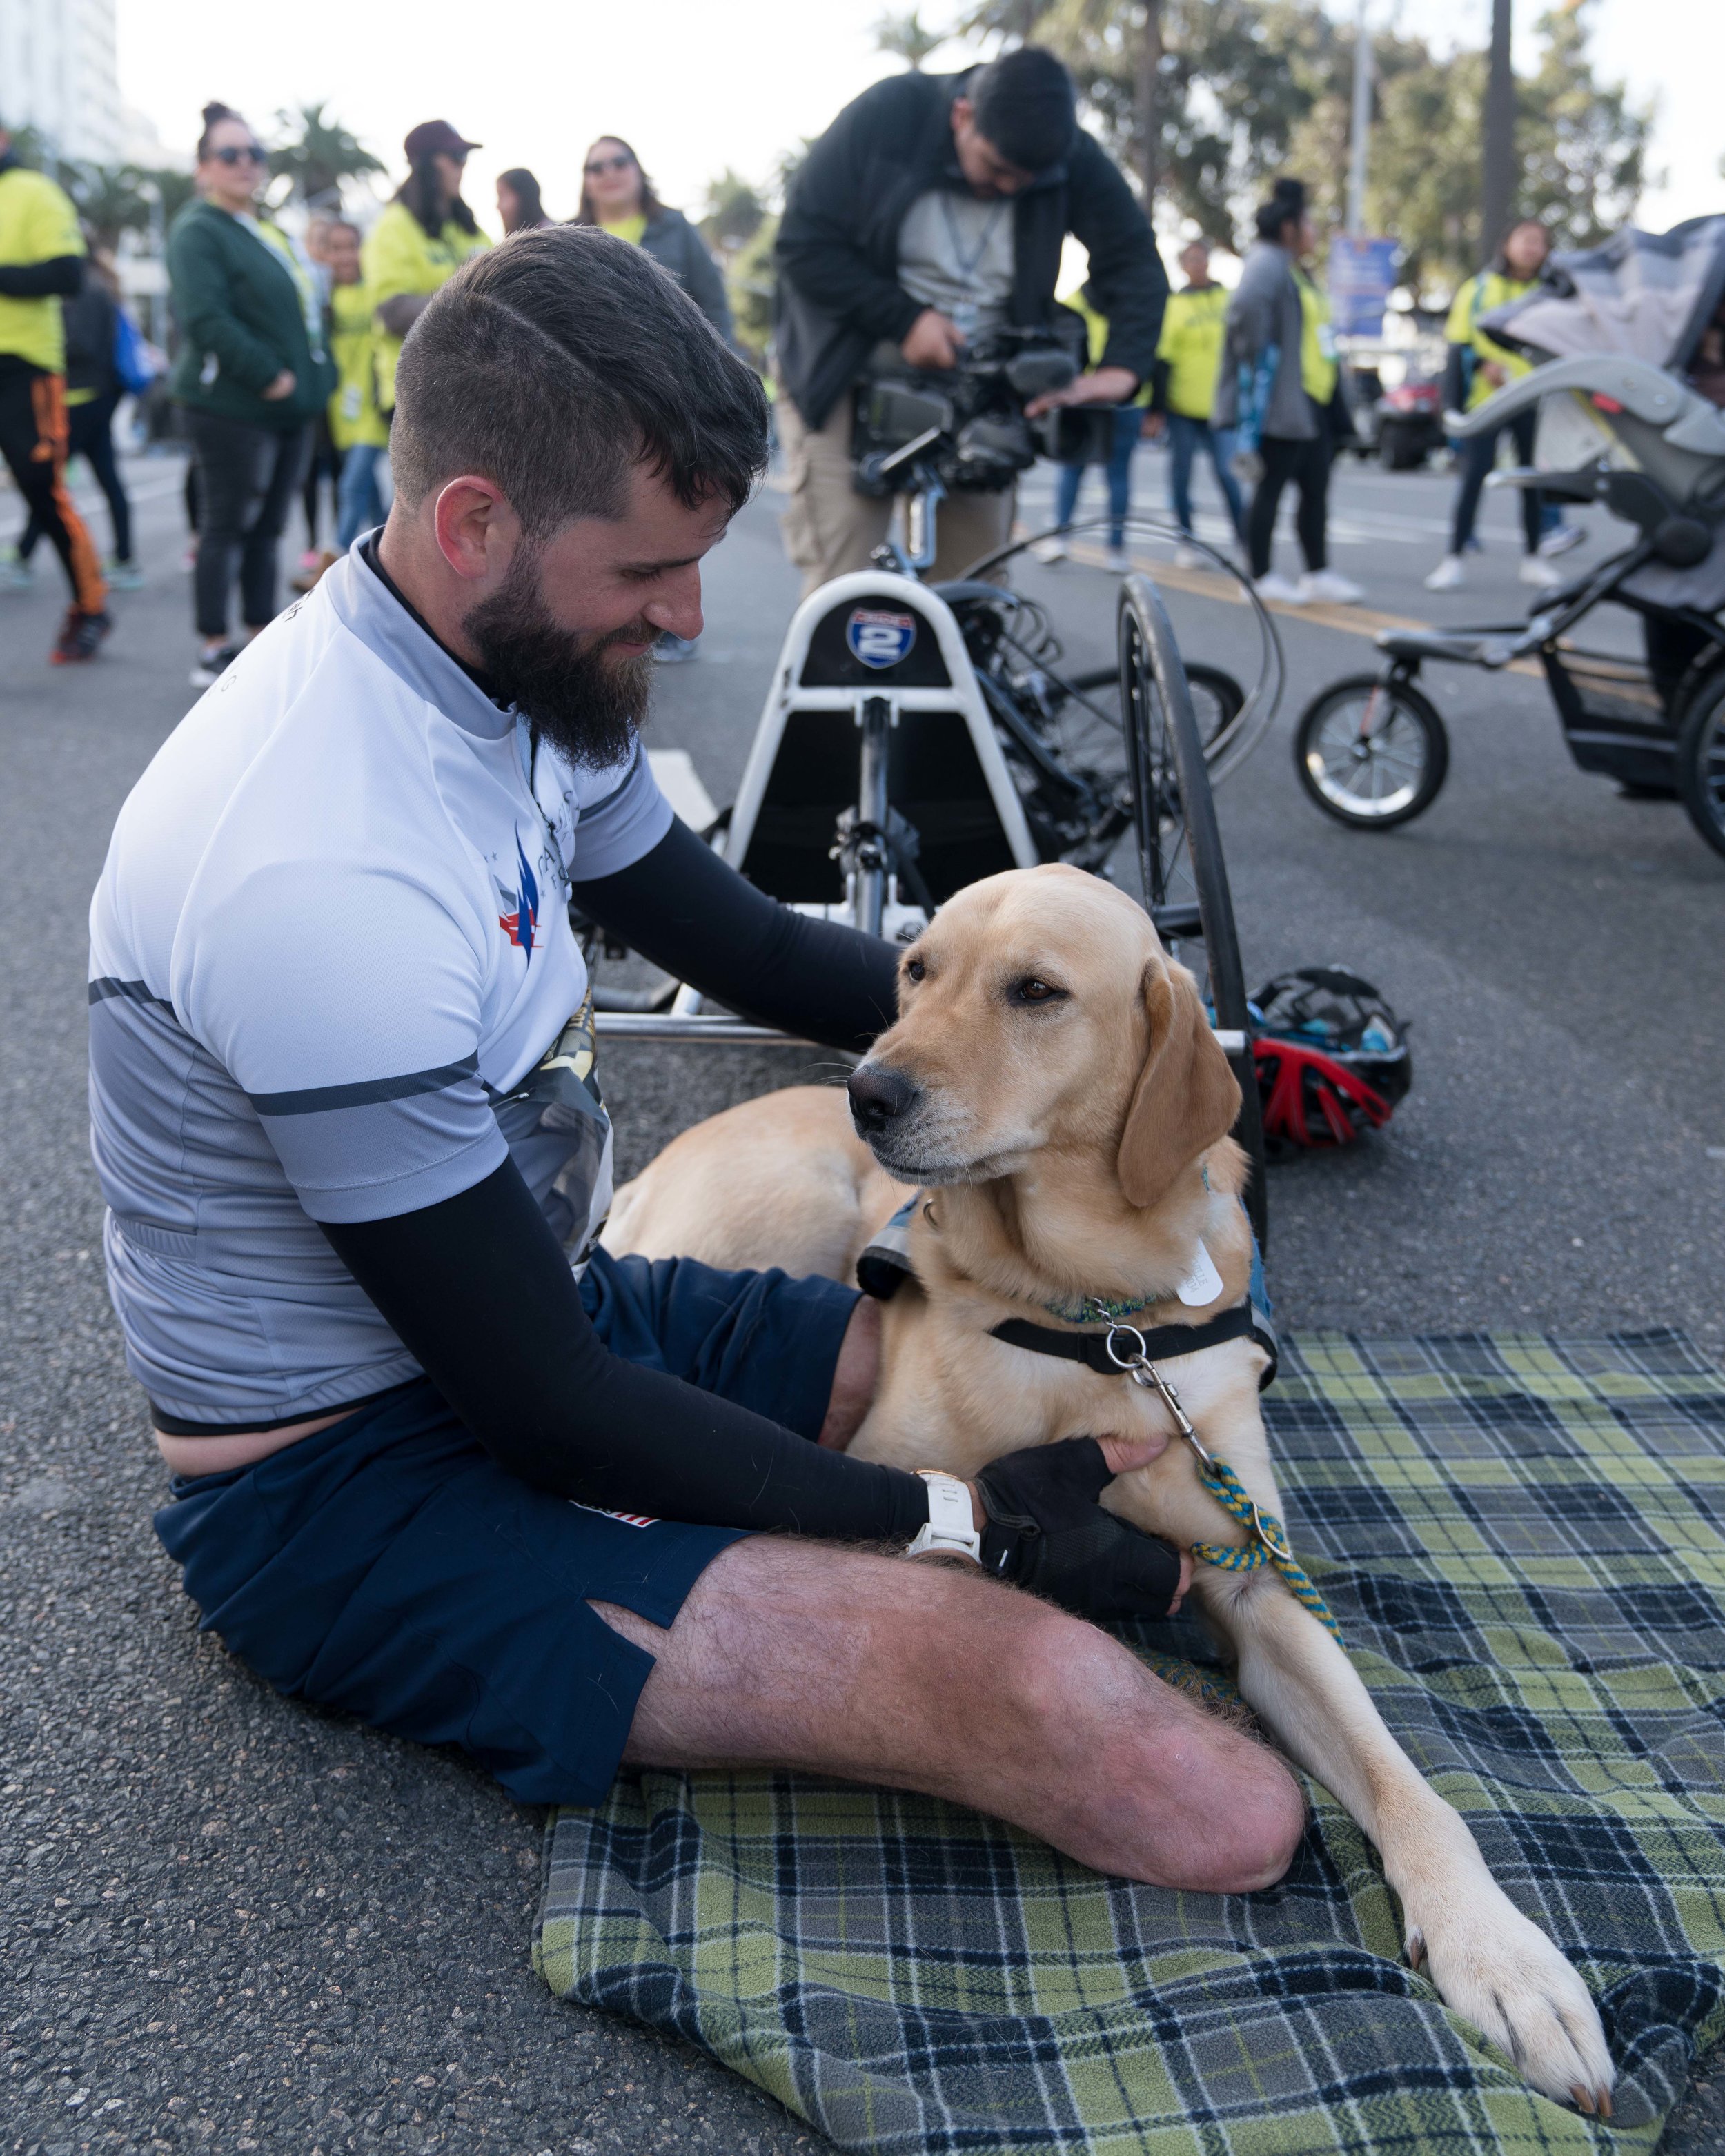  Stefan Leroy, 26, a retired United States Army Sergeant, competed as a wheelchair runner in the Los Angeles Marathon in Santa Monica, California on Sunday, Marhc 18, 2018. Leroy lost both his legs in an explosion while serving in Afghanistan in 2012